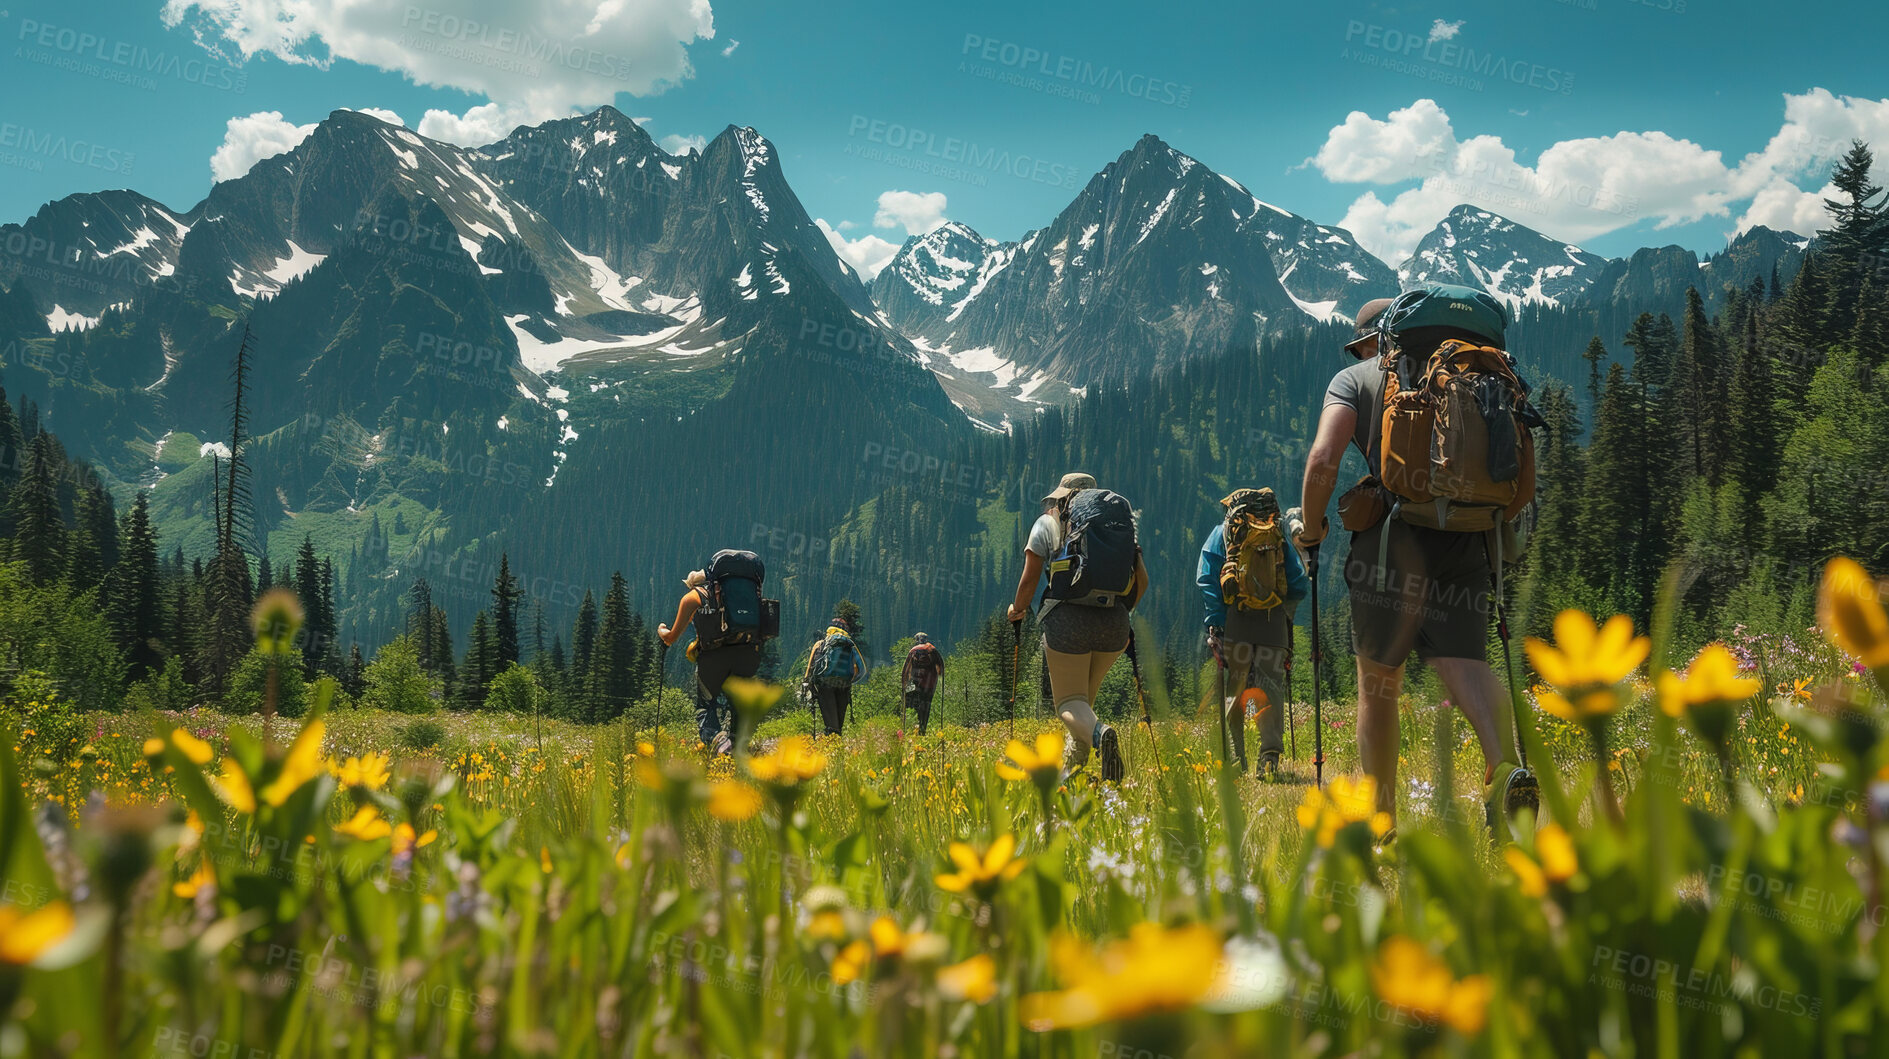 Buy stock photo Outdoor hiking, mountain and scenic views with backpacks. Exploring nature, enjoying landscapes and walking adventure on trails. Health, exercise and freedom for active lifestyle.